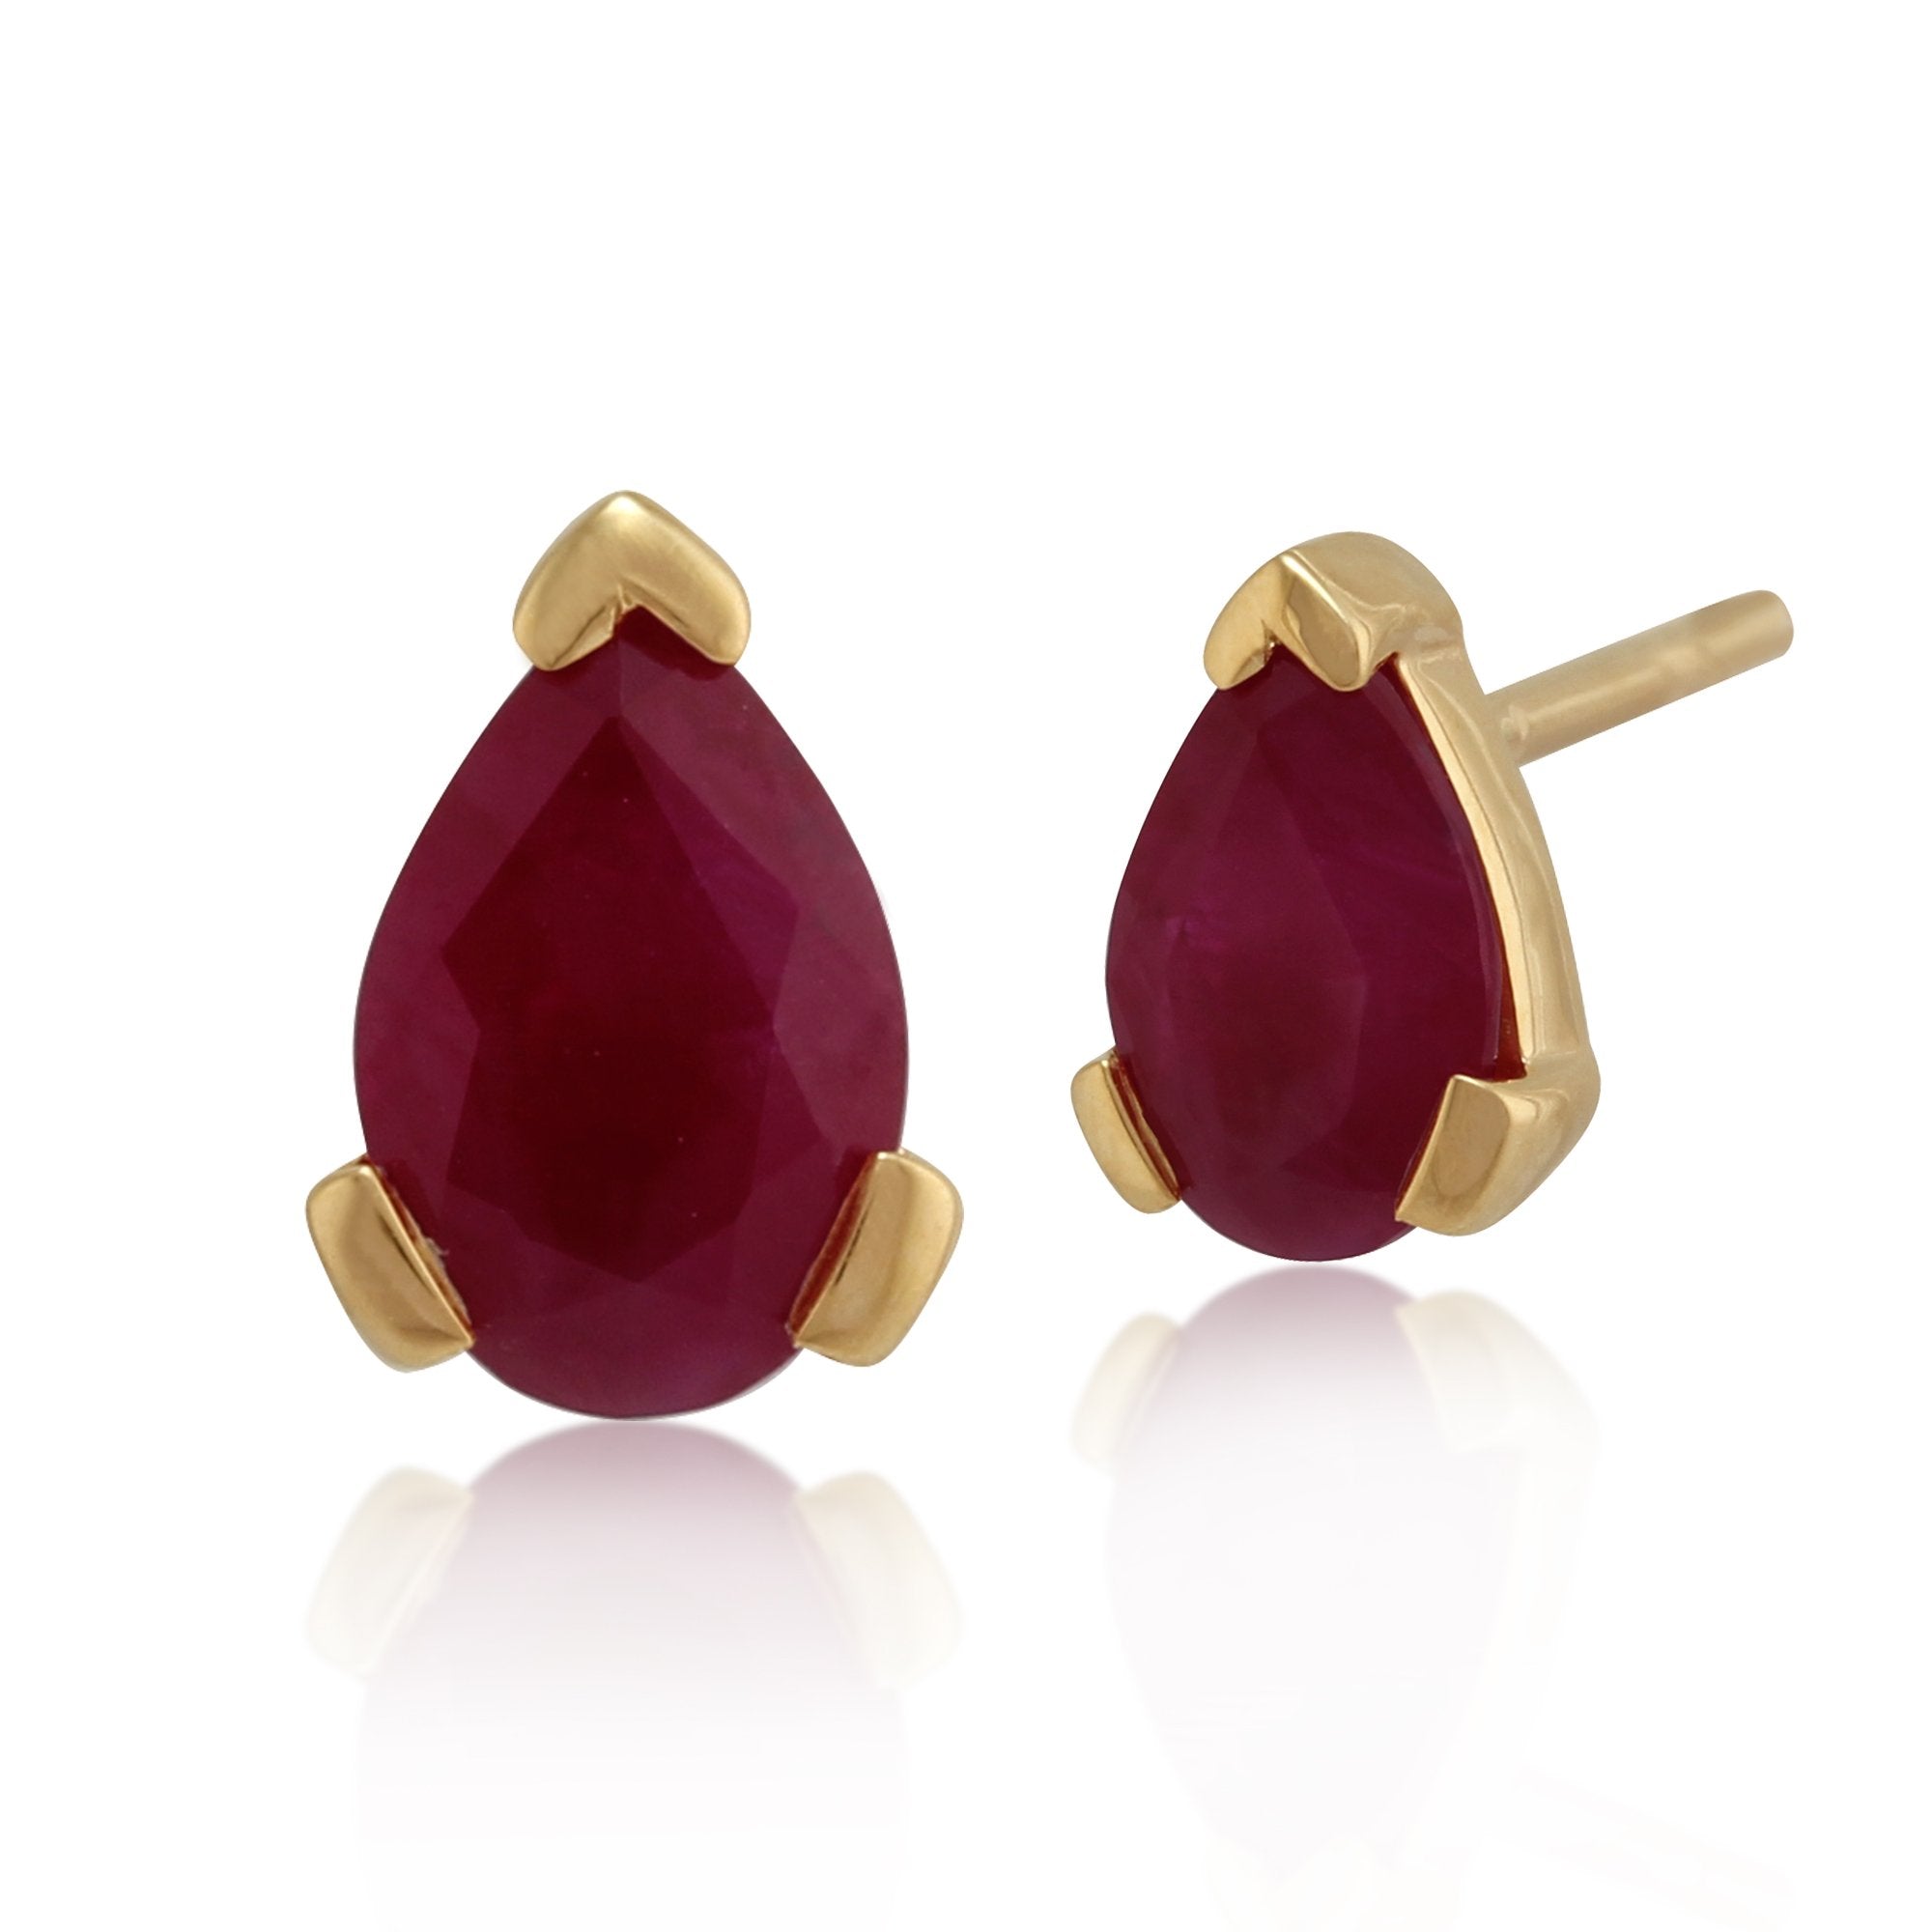 Classic Pear Ruby Stud Earrings in 9ct Yellow Gold 6.5x4mm